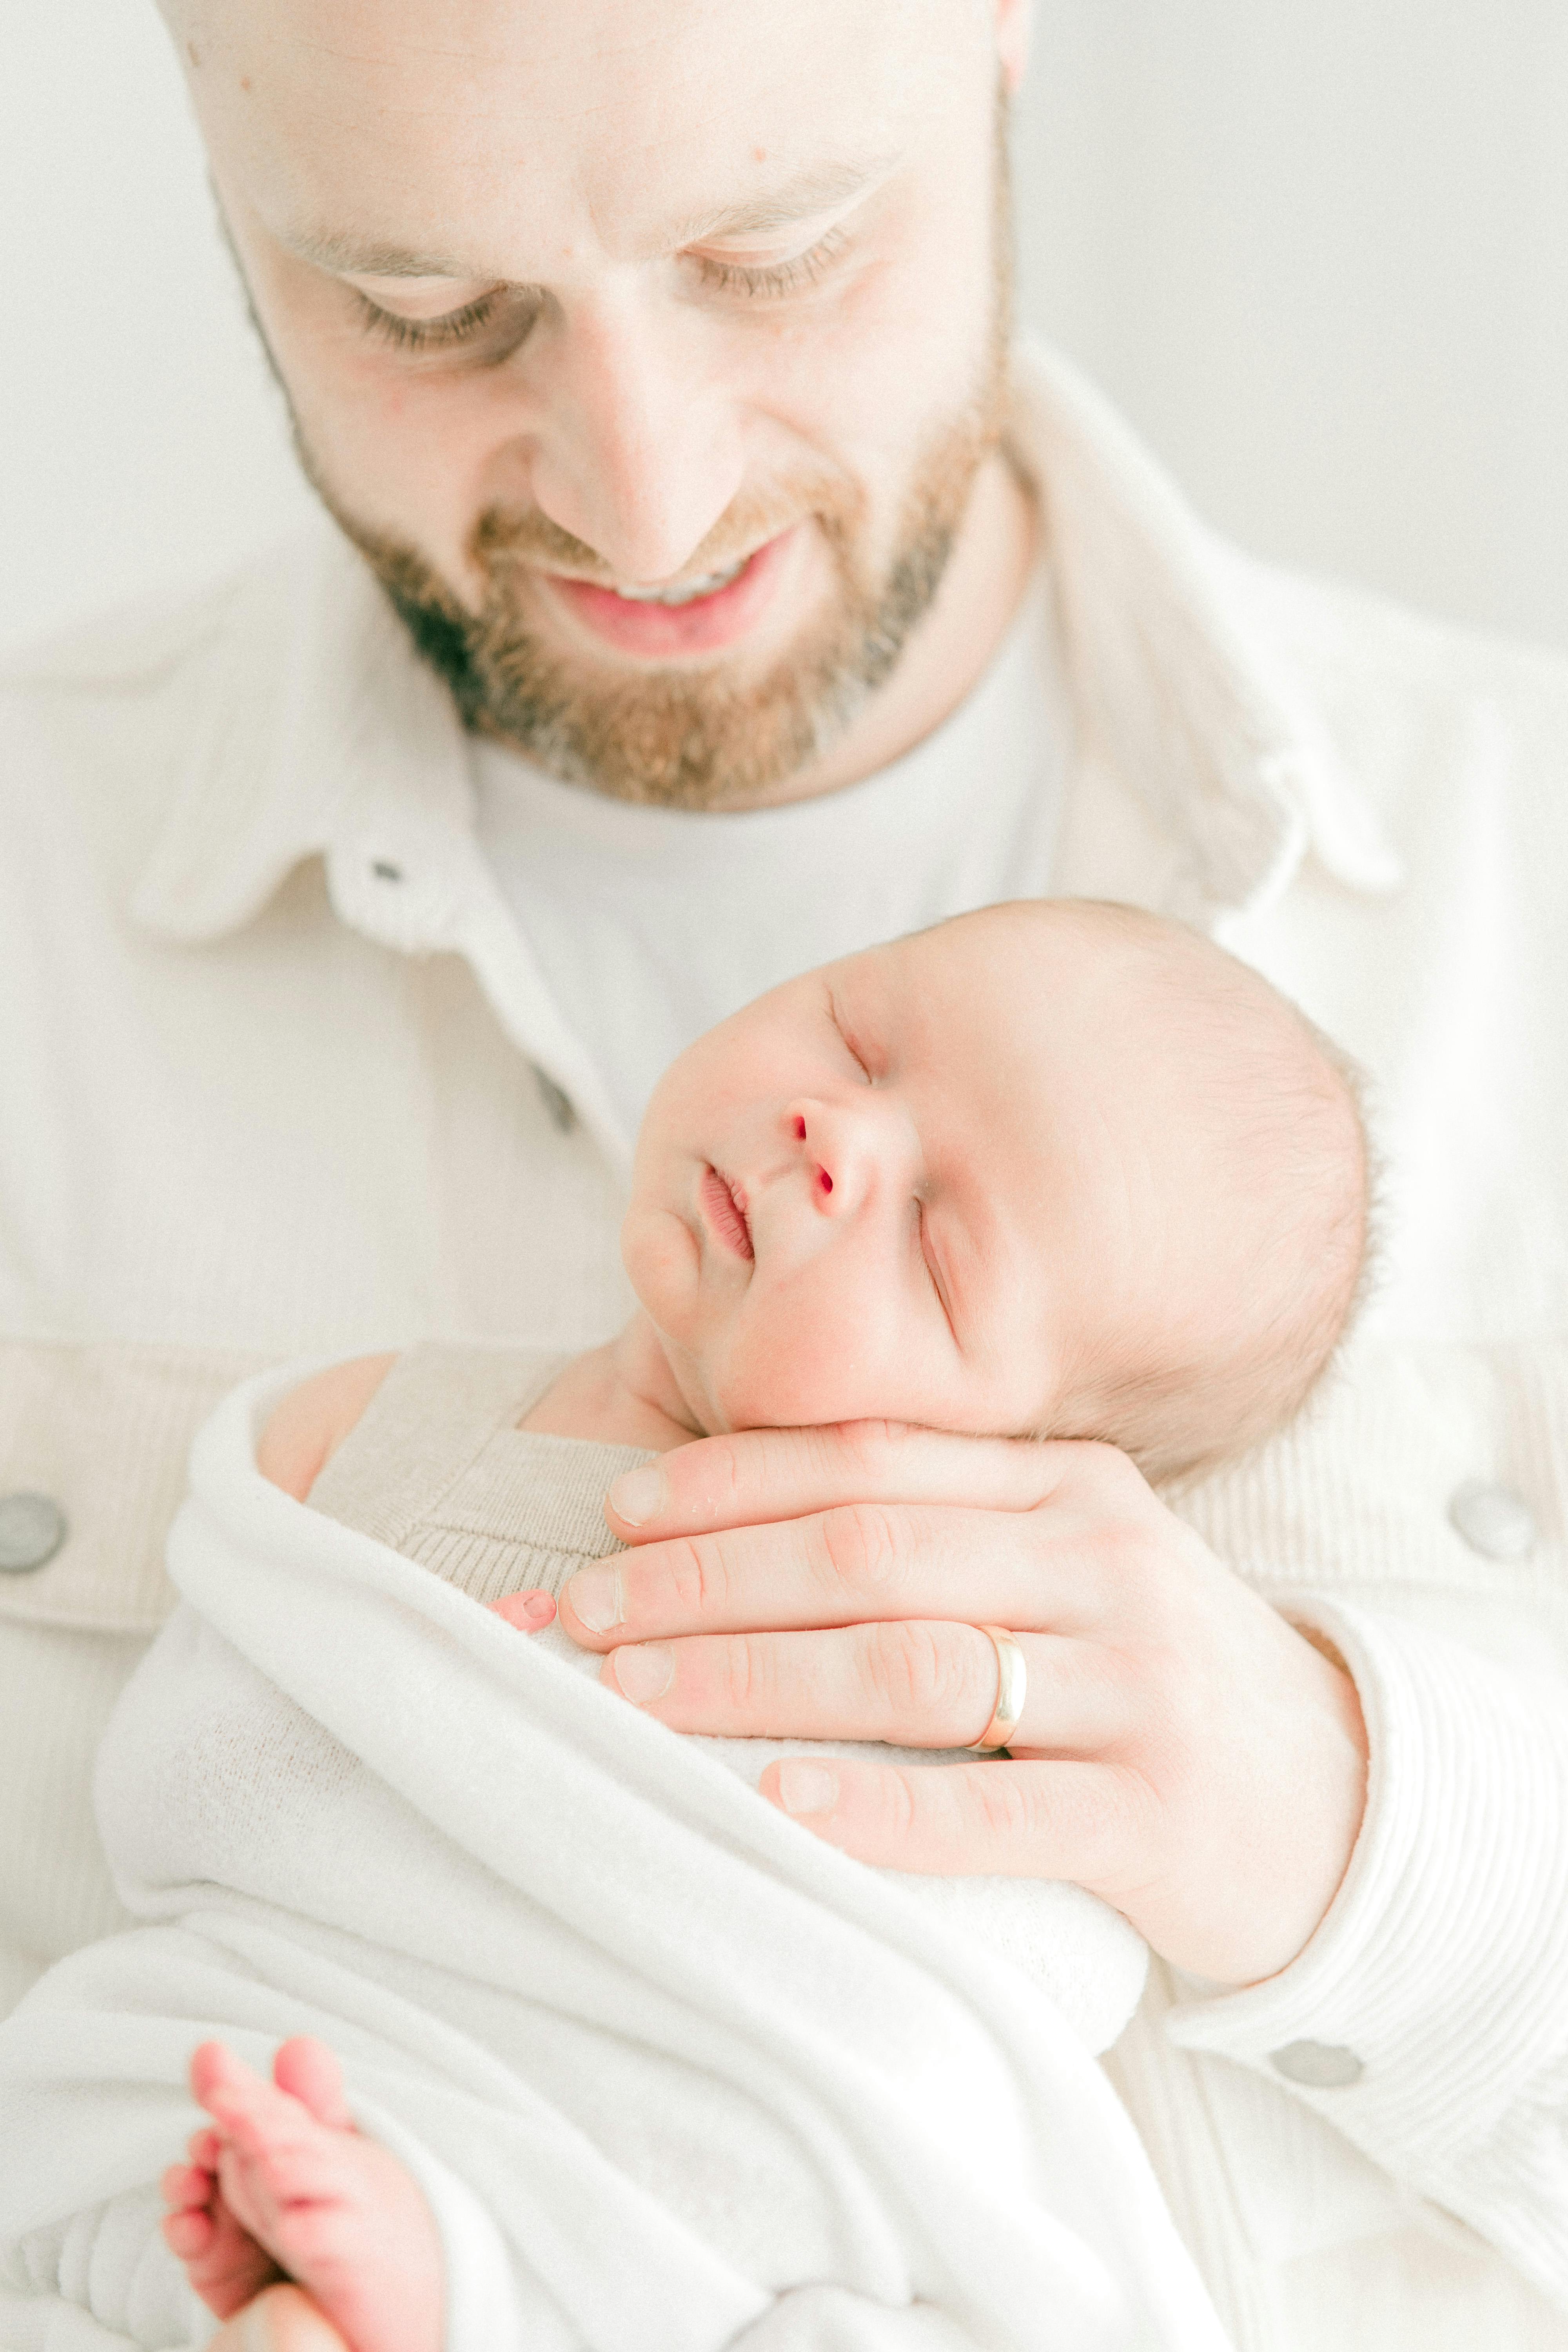 A newborn baby held by a happy father | Source: Pexels